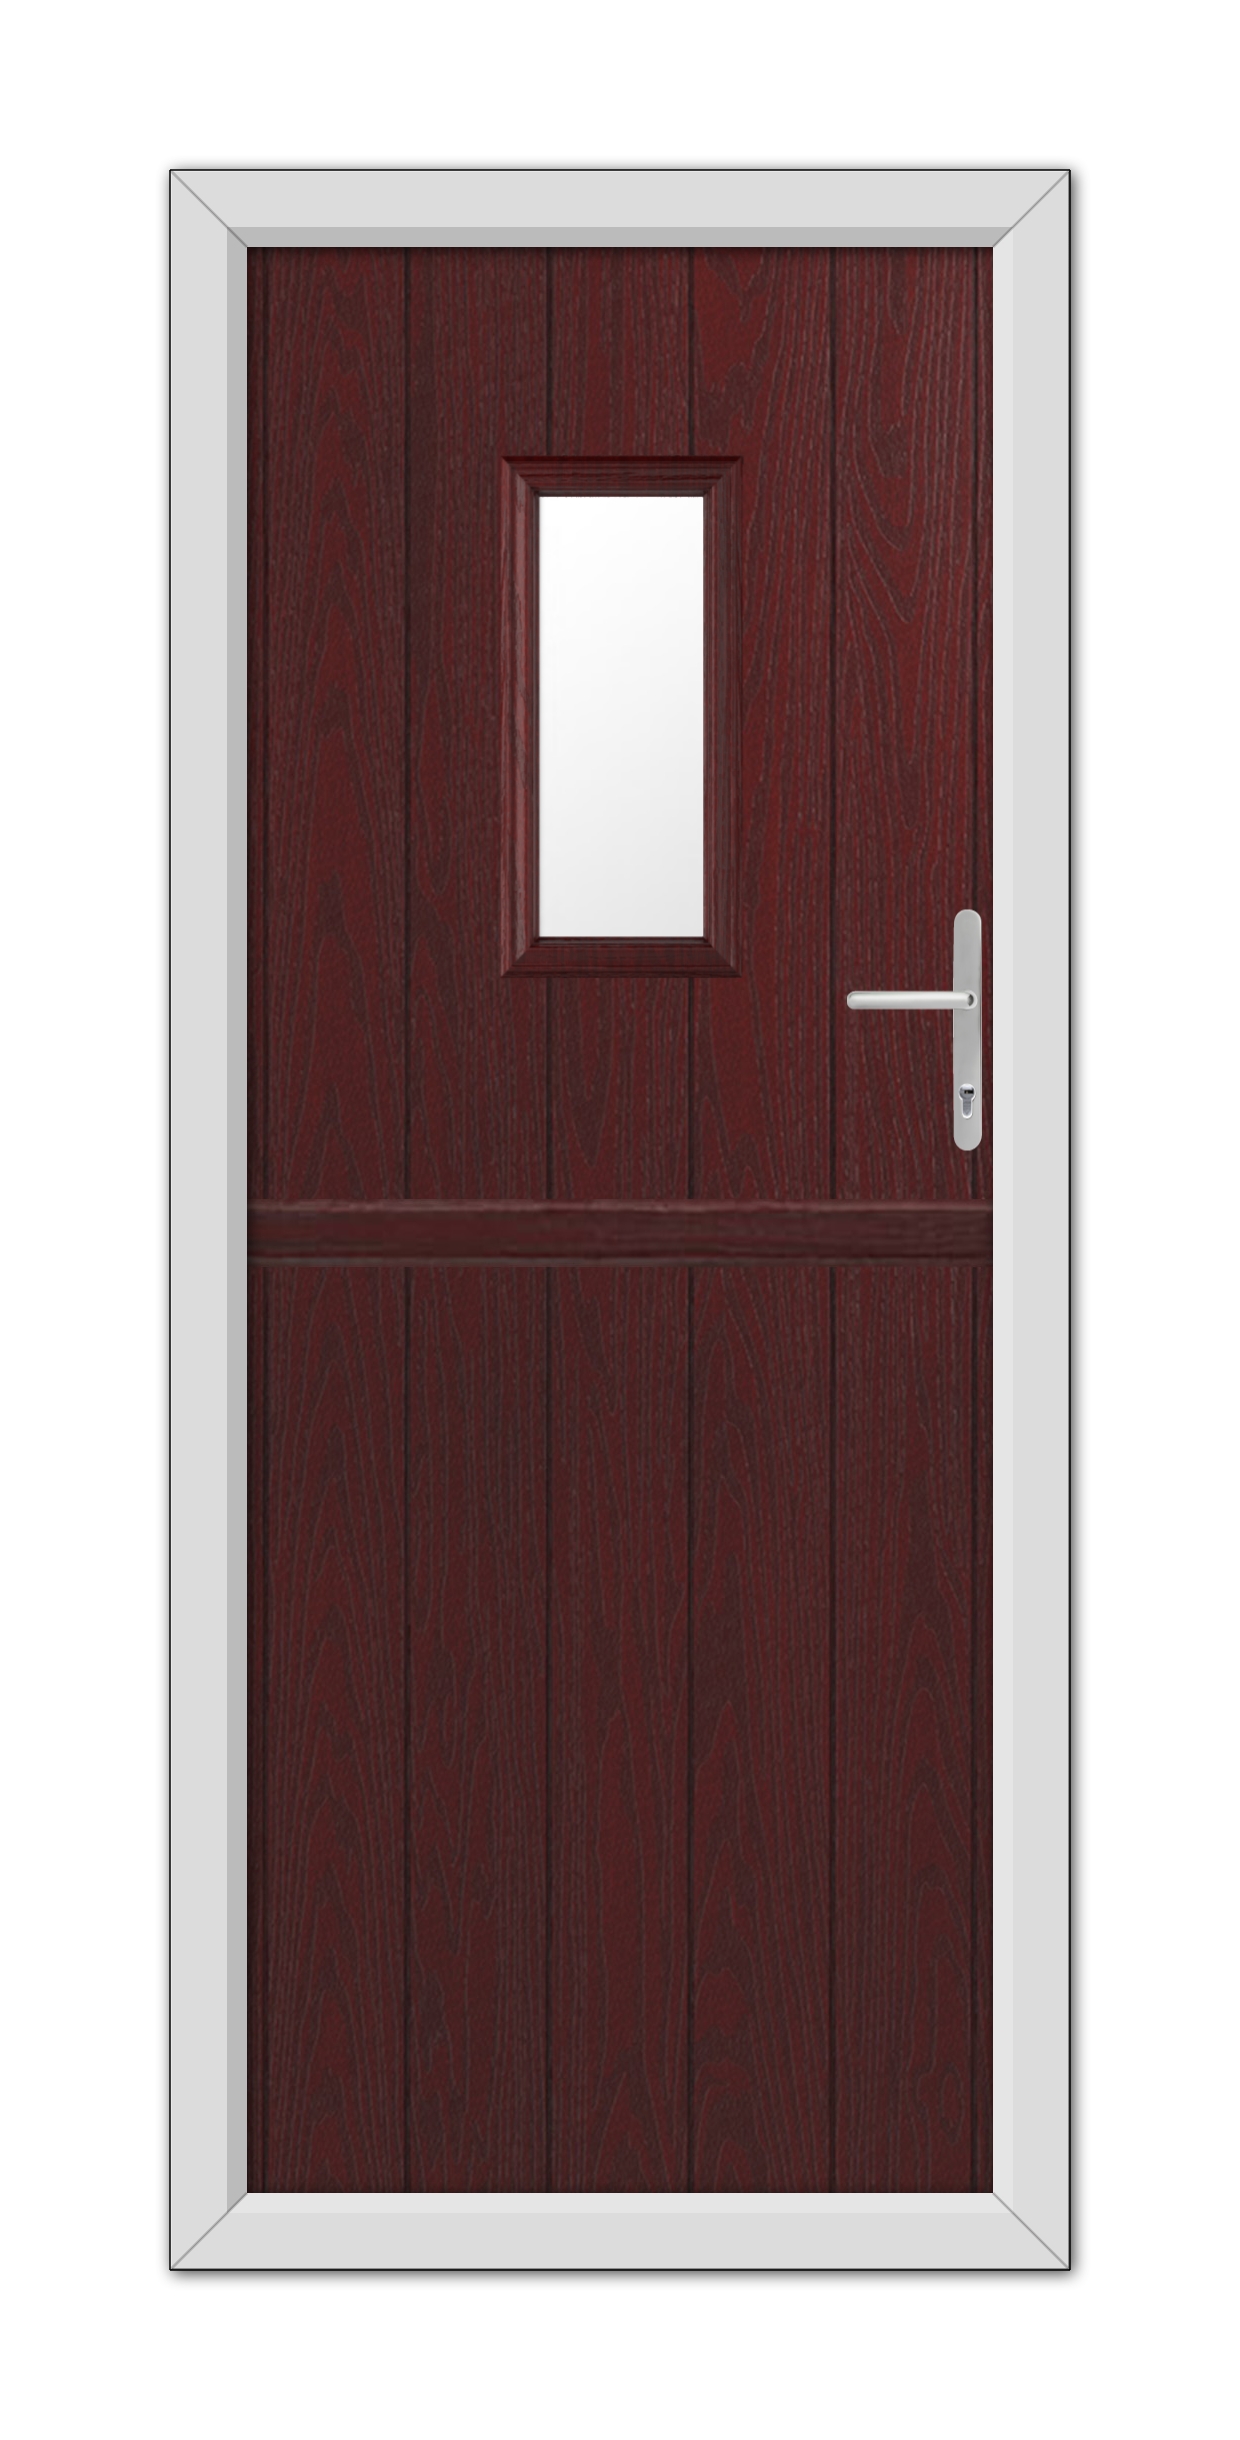 A modern Rosewood Somerset Stable Composite Door featuring a small square window at eye level and a metallic handle on the right side, framed in white.